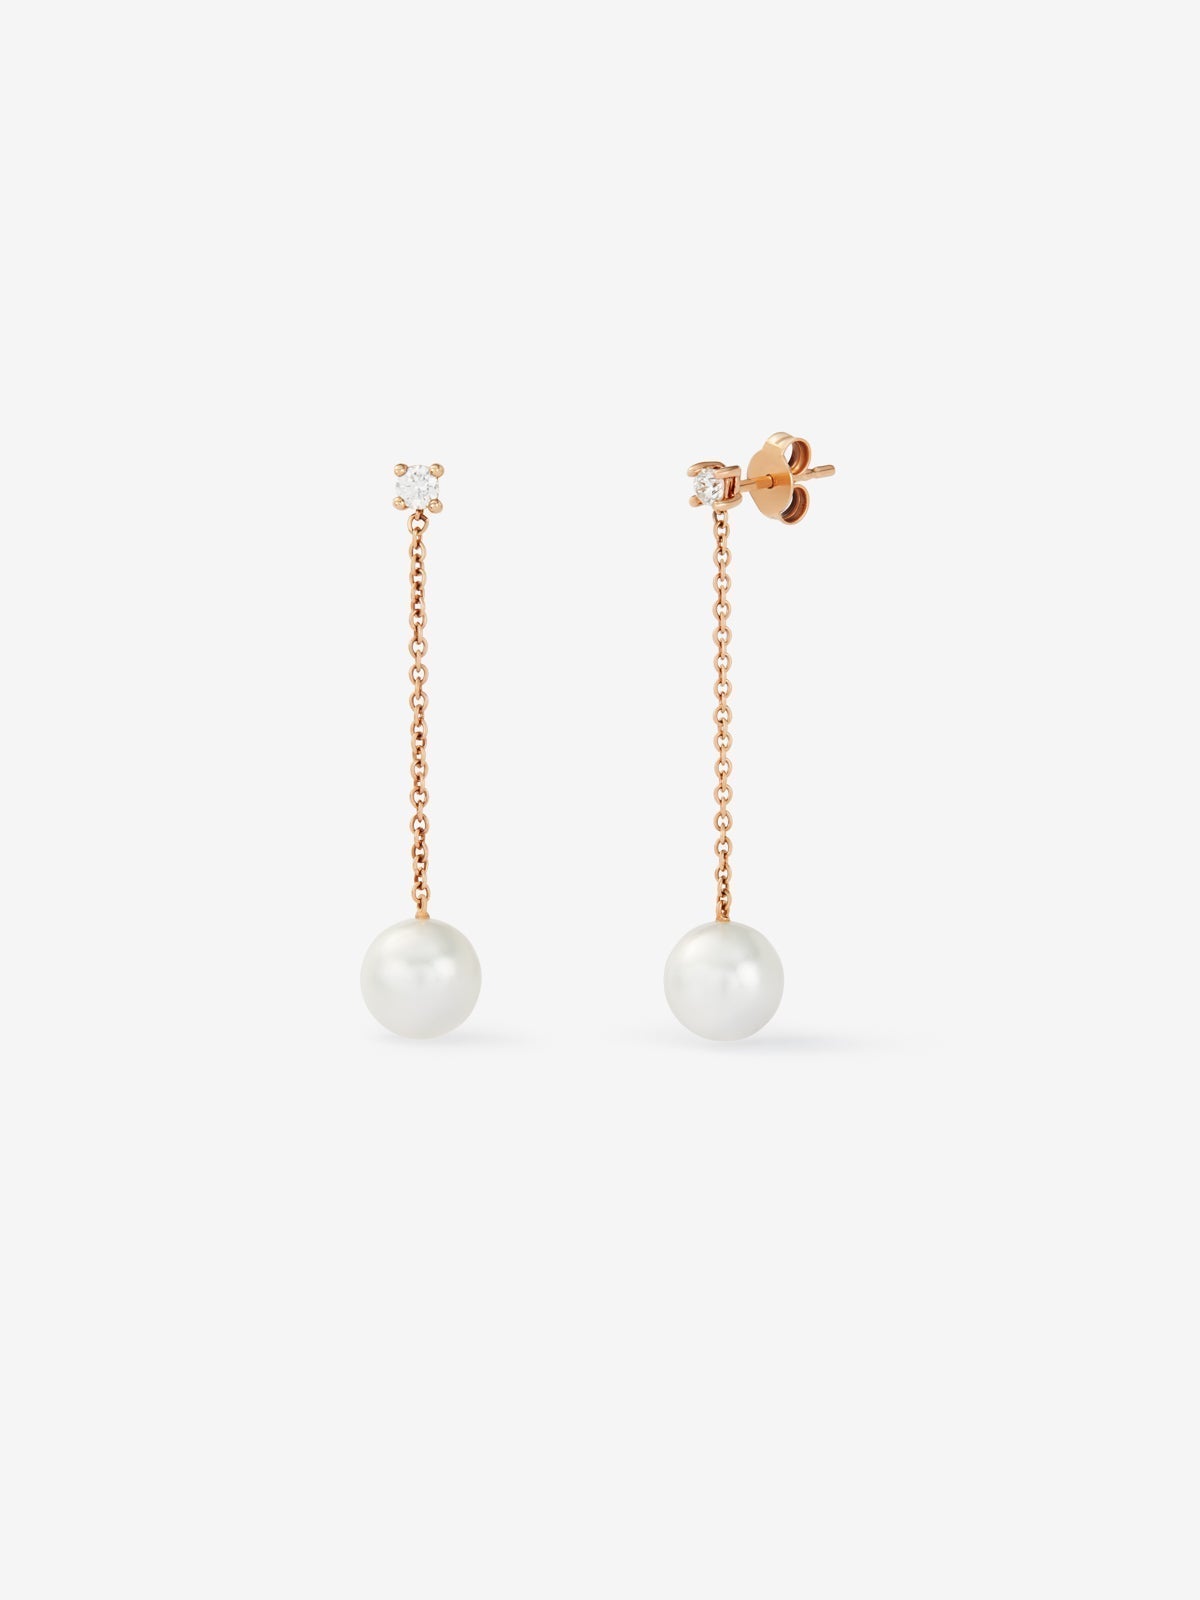 18K rose gold chain earrings with 0.22 ct brilliant cut diamonds and 9mm pearls